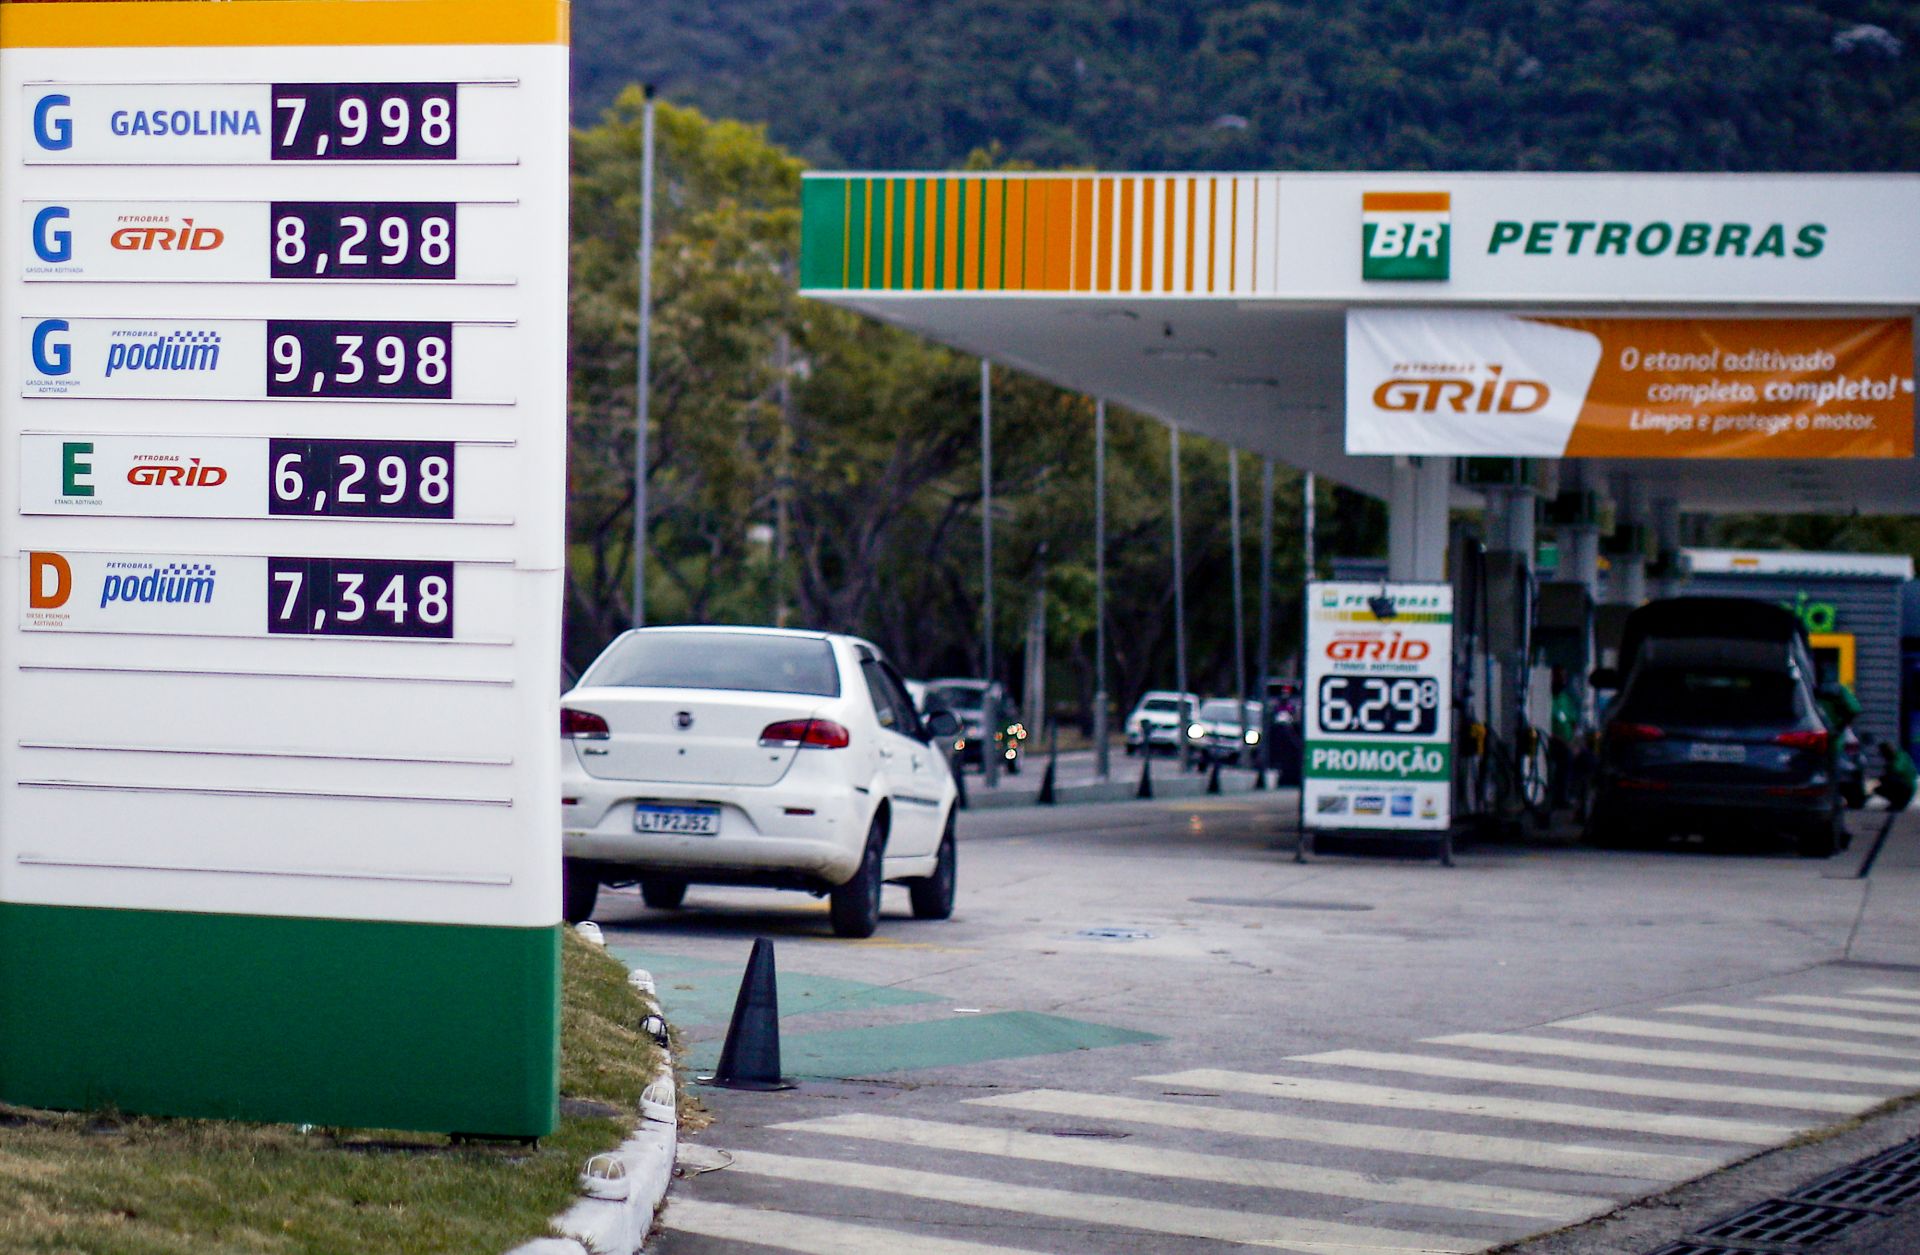 A list of prices is seen at a gas station operated by the Brazilian state-run oil company Petrobras in Rio de Janeiro, Brazil, on March 12, 2022. Petrobras announced fuel price increases due to the Russia-Ukraine conflict, which has spiked global crude prices. 